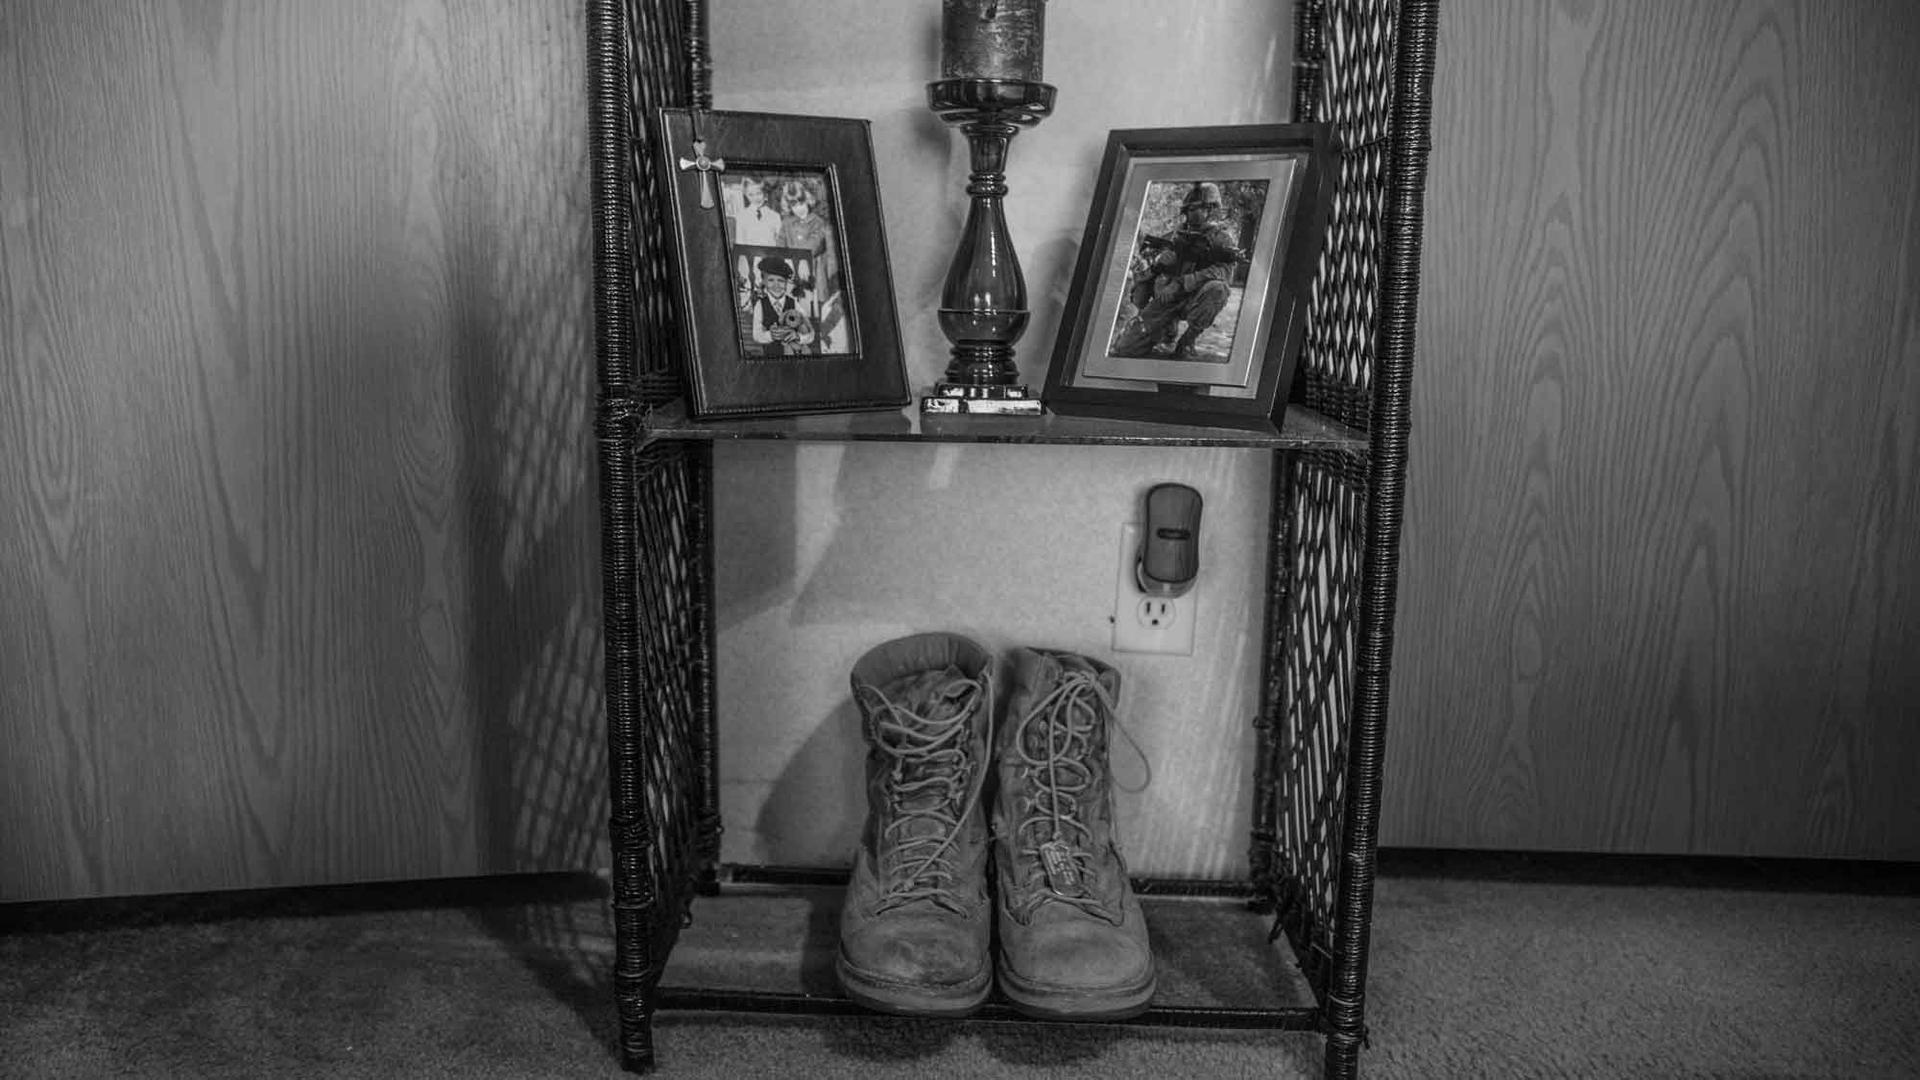 Brandon Ladner. Pelham, Alabama. Ladner's Marine Corps boots sit on a small shelf in his bedroom. Ladner was a US Marine Corps vereran who fought in Afghanistan's Helmand Province. He shot himself inside his living room, and thee bullet remains lodged in 